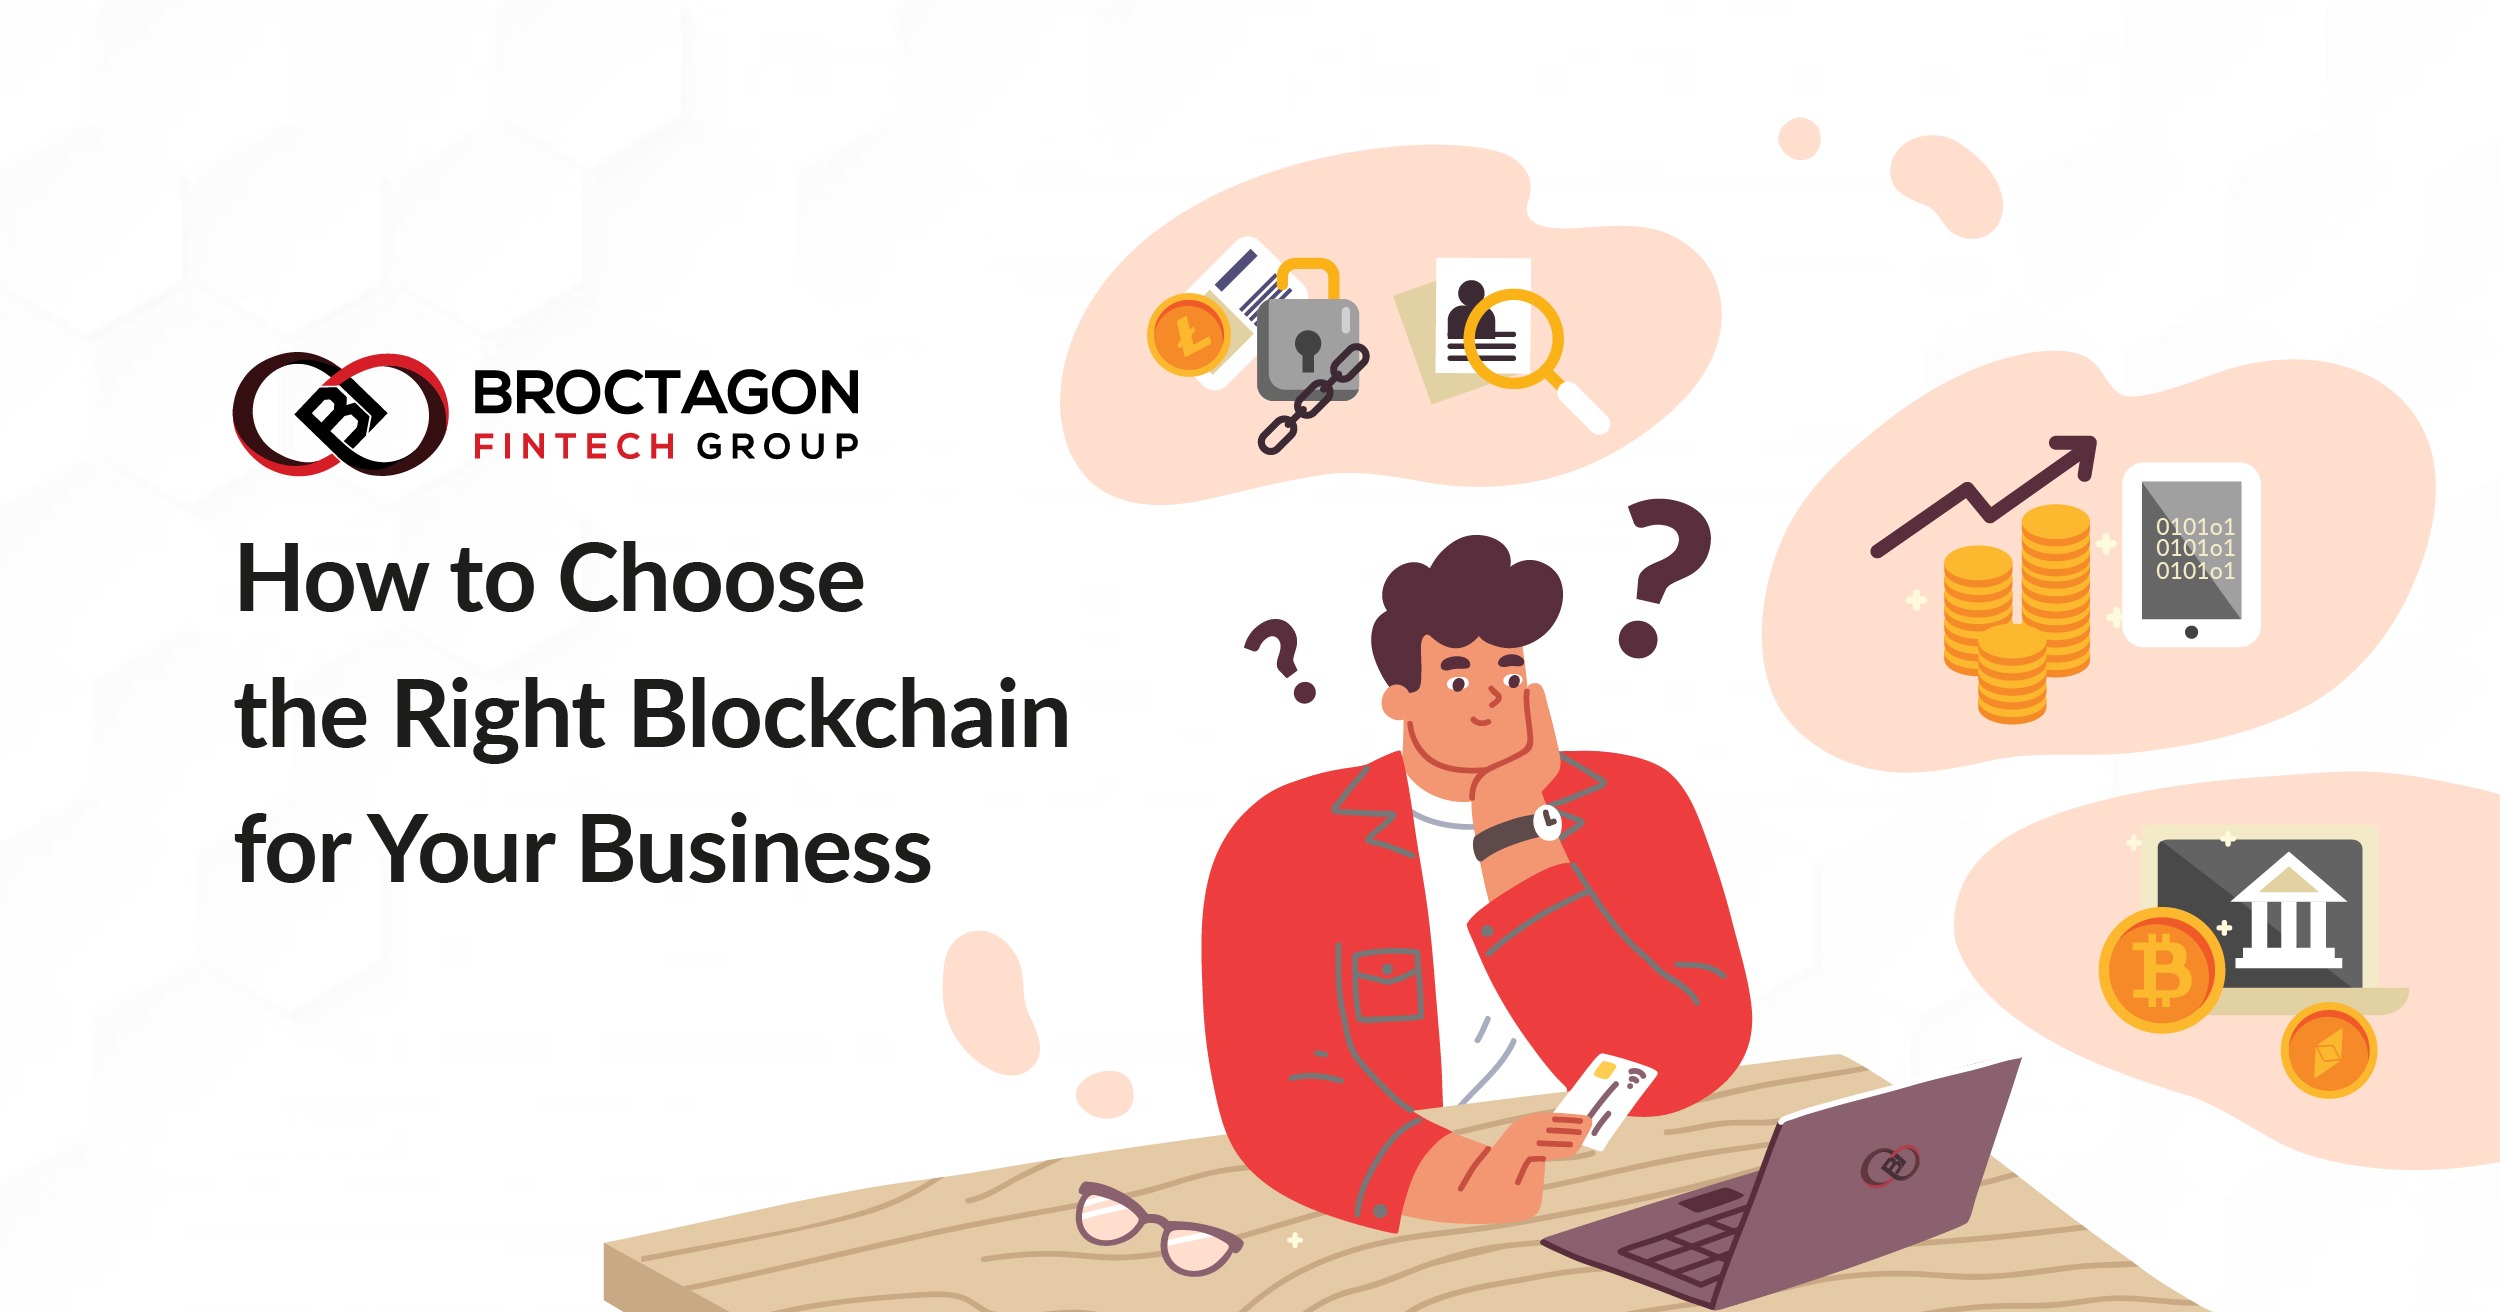 How to Choose the Right Blockchain for Your Business